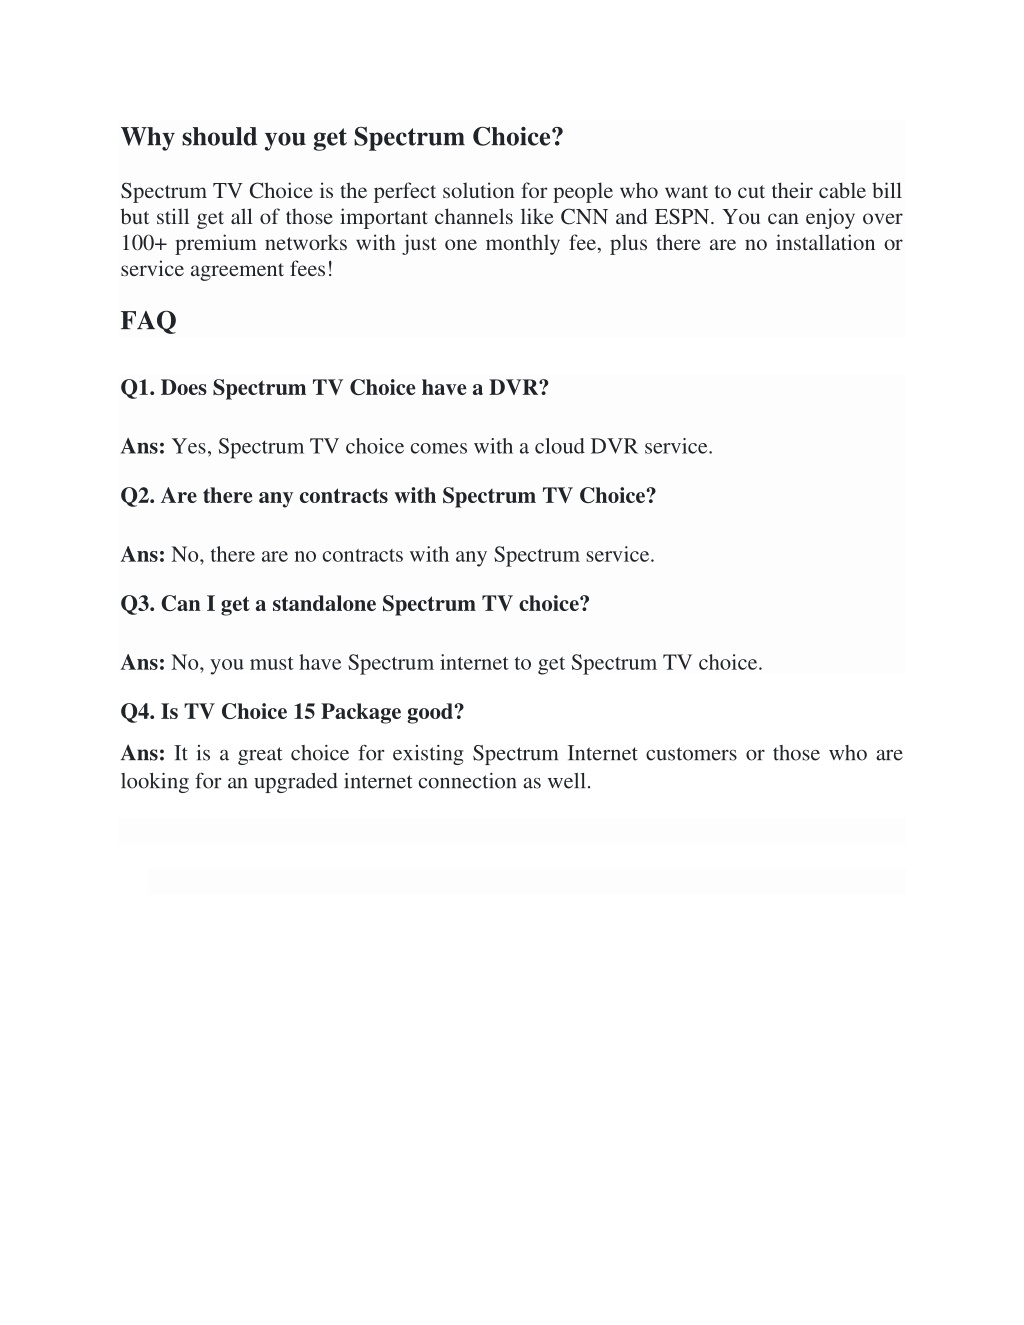 additional channels for spectrum tv choice